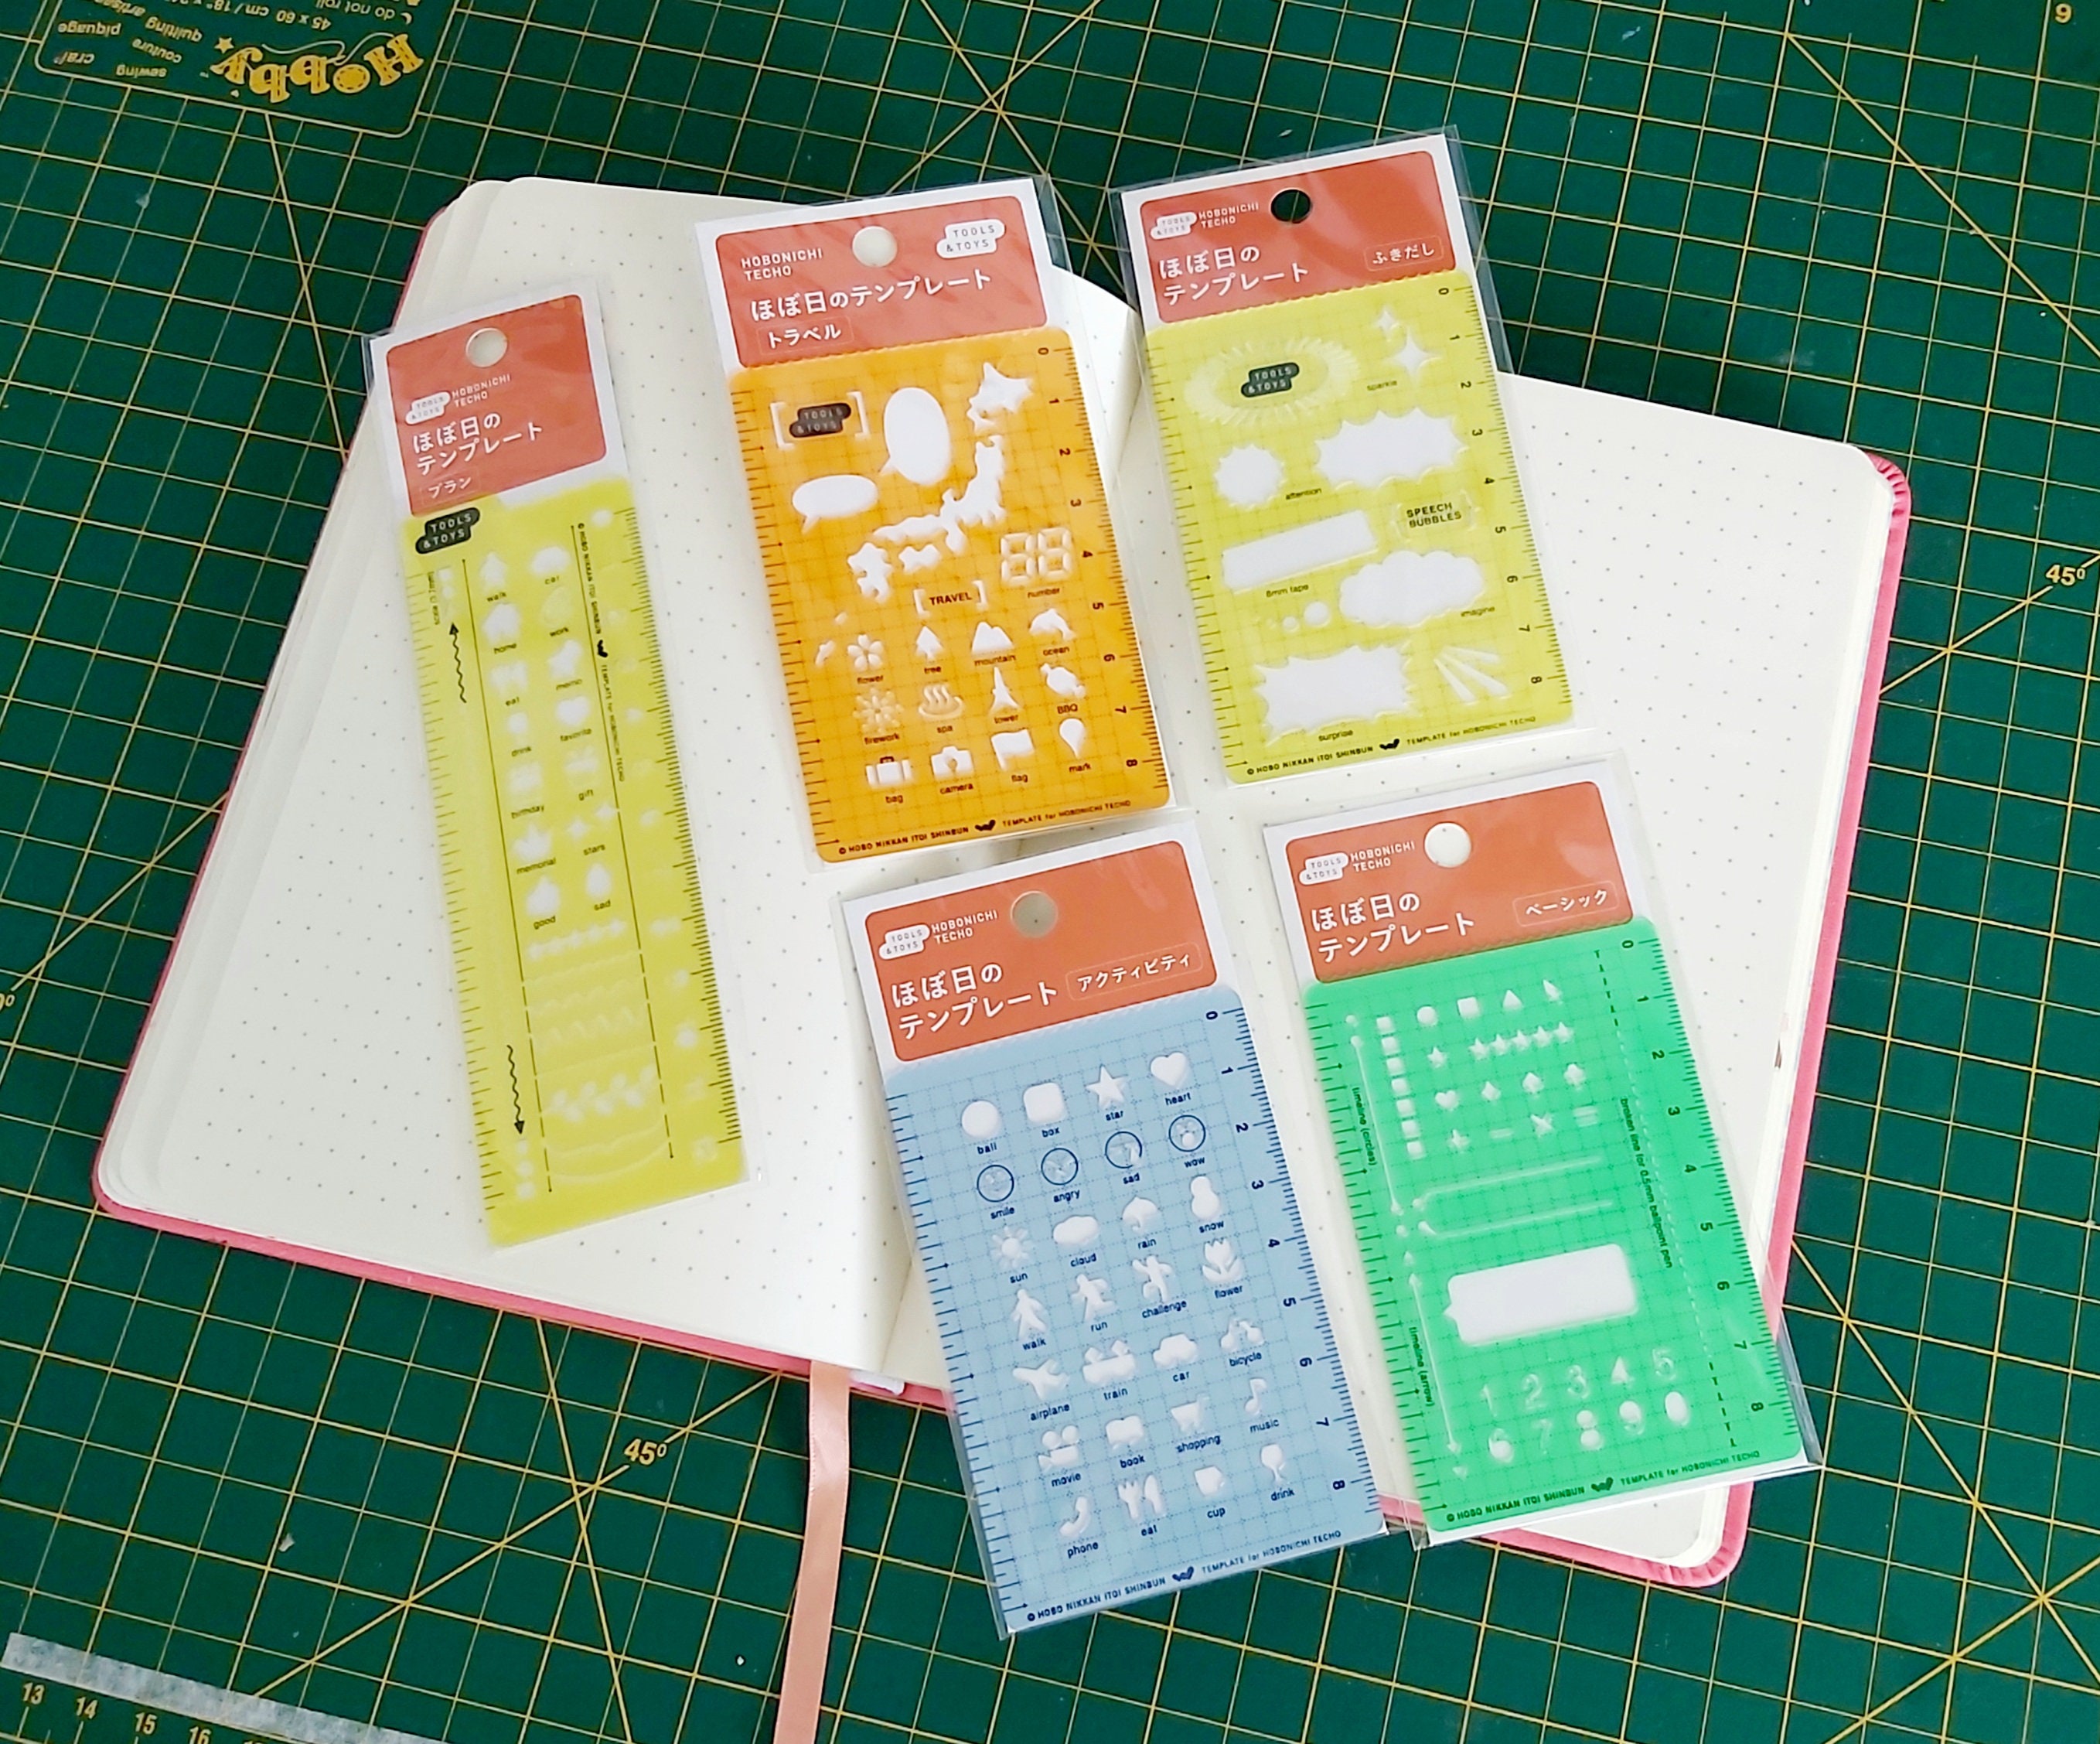 Ciieeo 3pcs Line Drawing Ruler Envelope Guide Stencil Straight Line Stencil  Metal Ruler Clear Ruler Writing Template Ruler with Inches and Centimeters